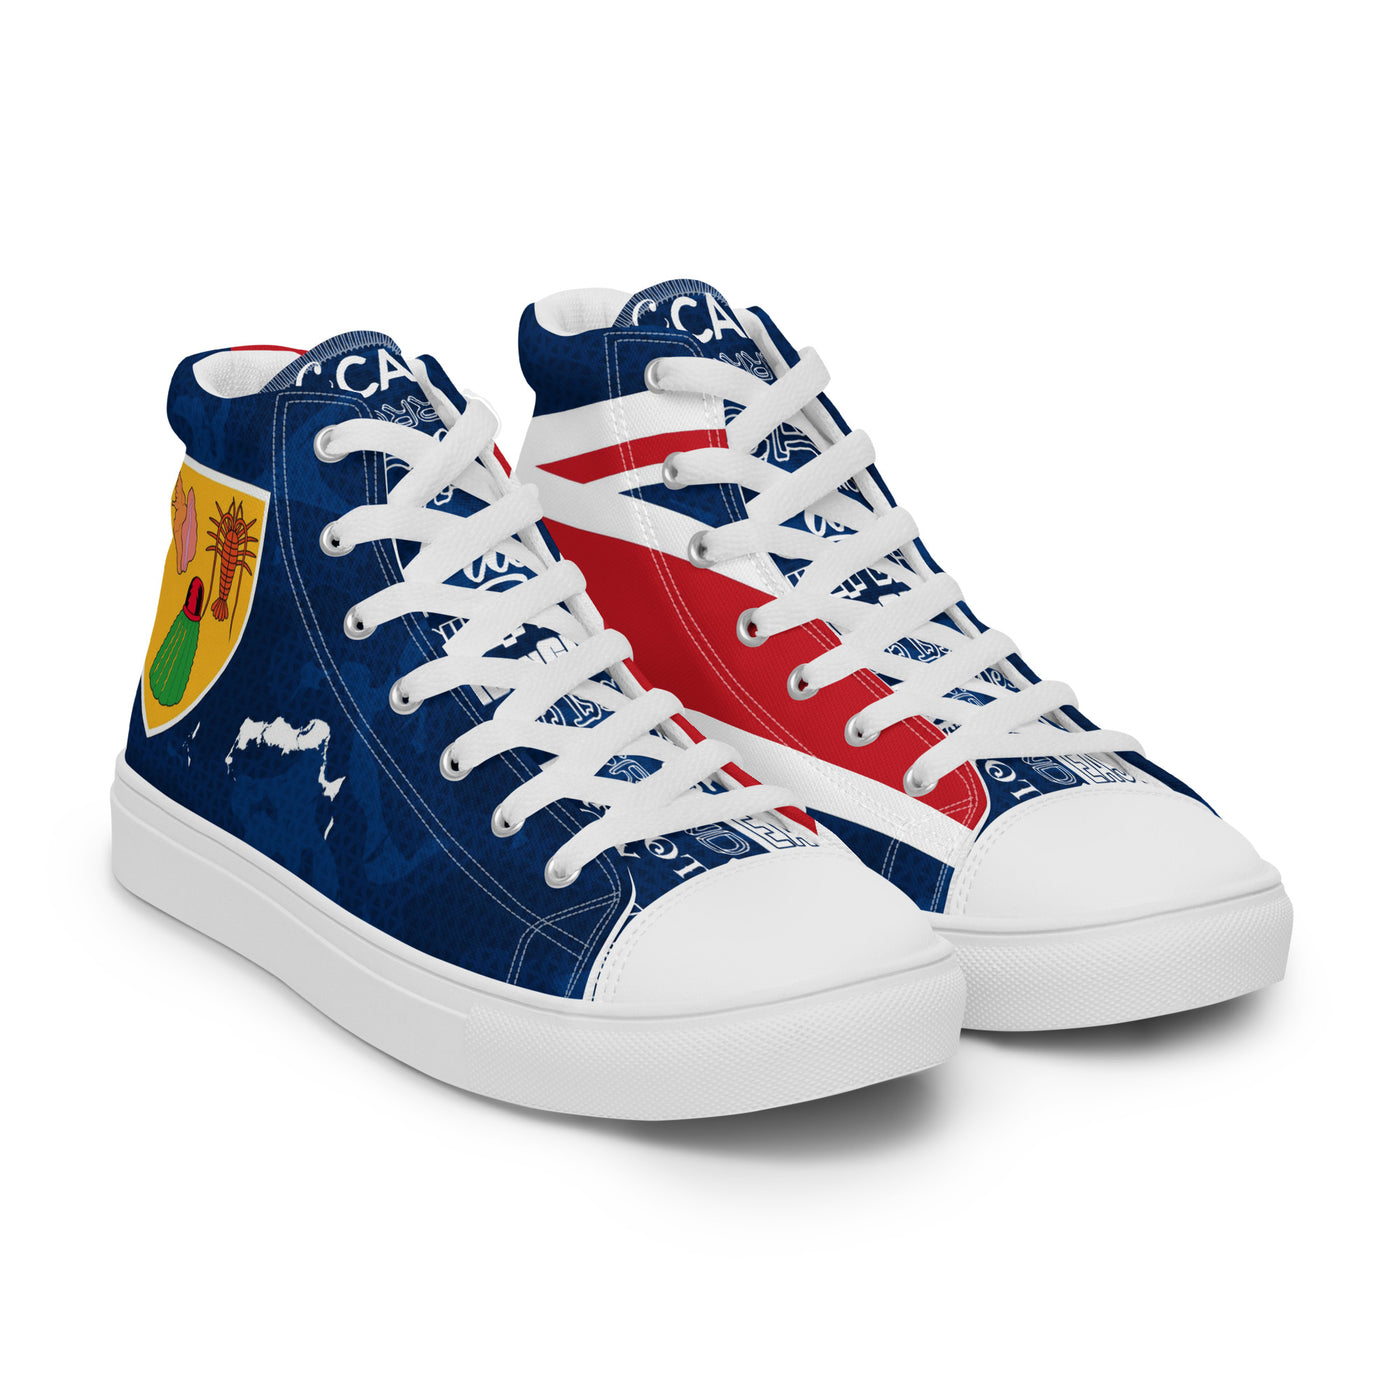 TCI Reppin Men’s High Top Canvas Shoes